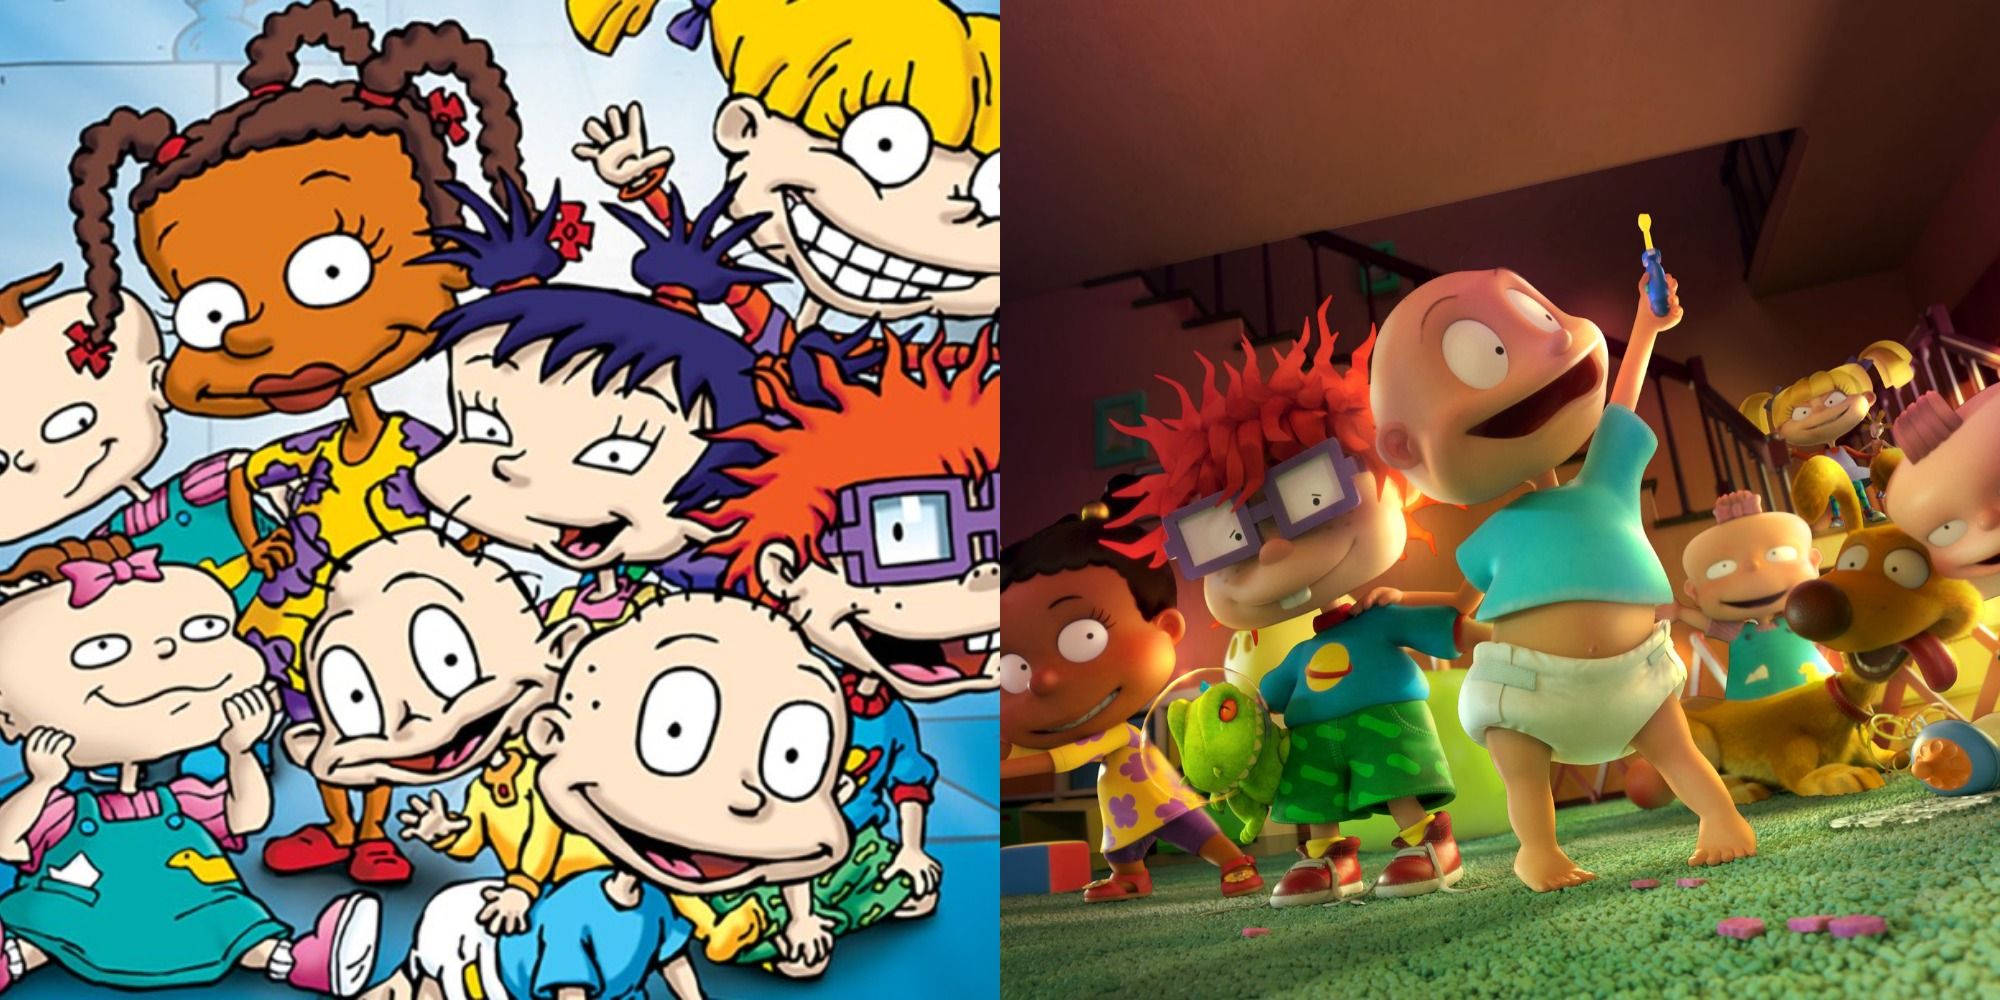 Split image of the Rugrats in the original show and reboot